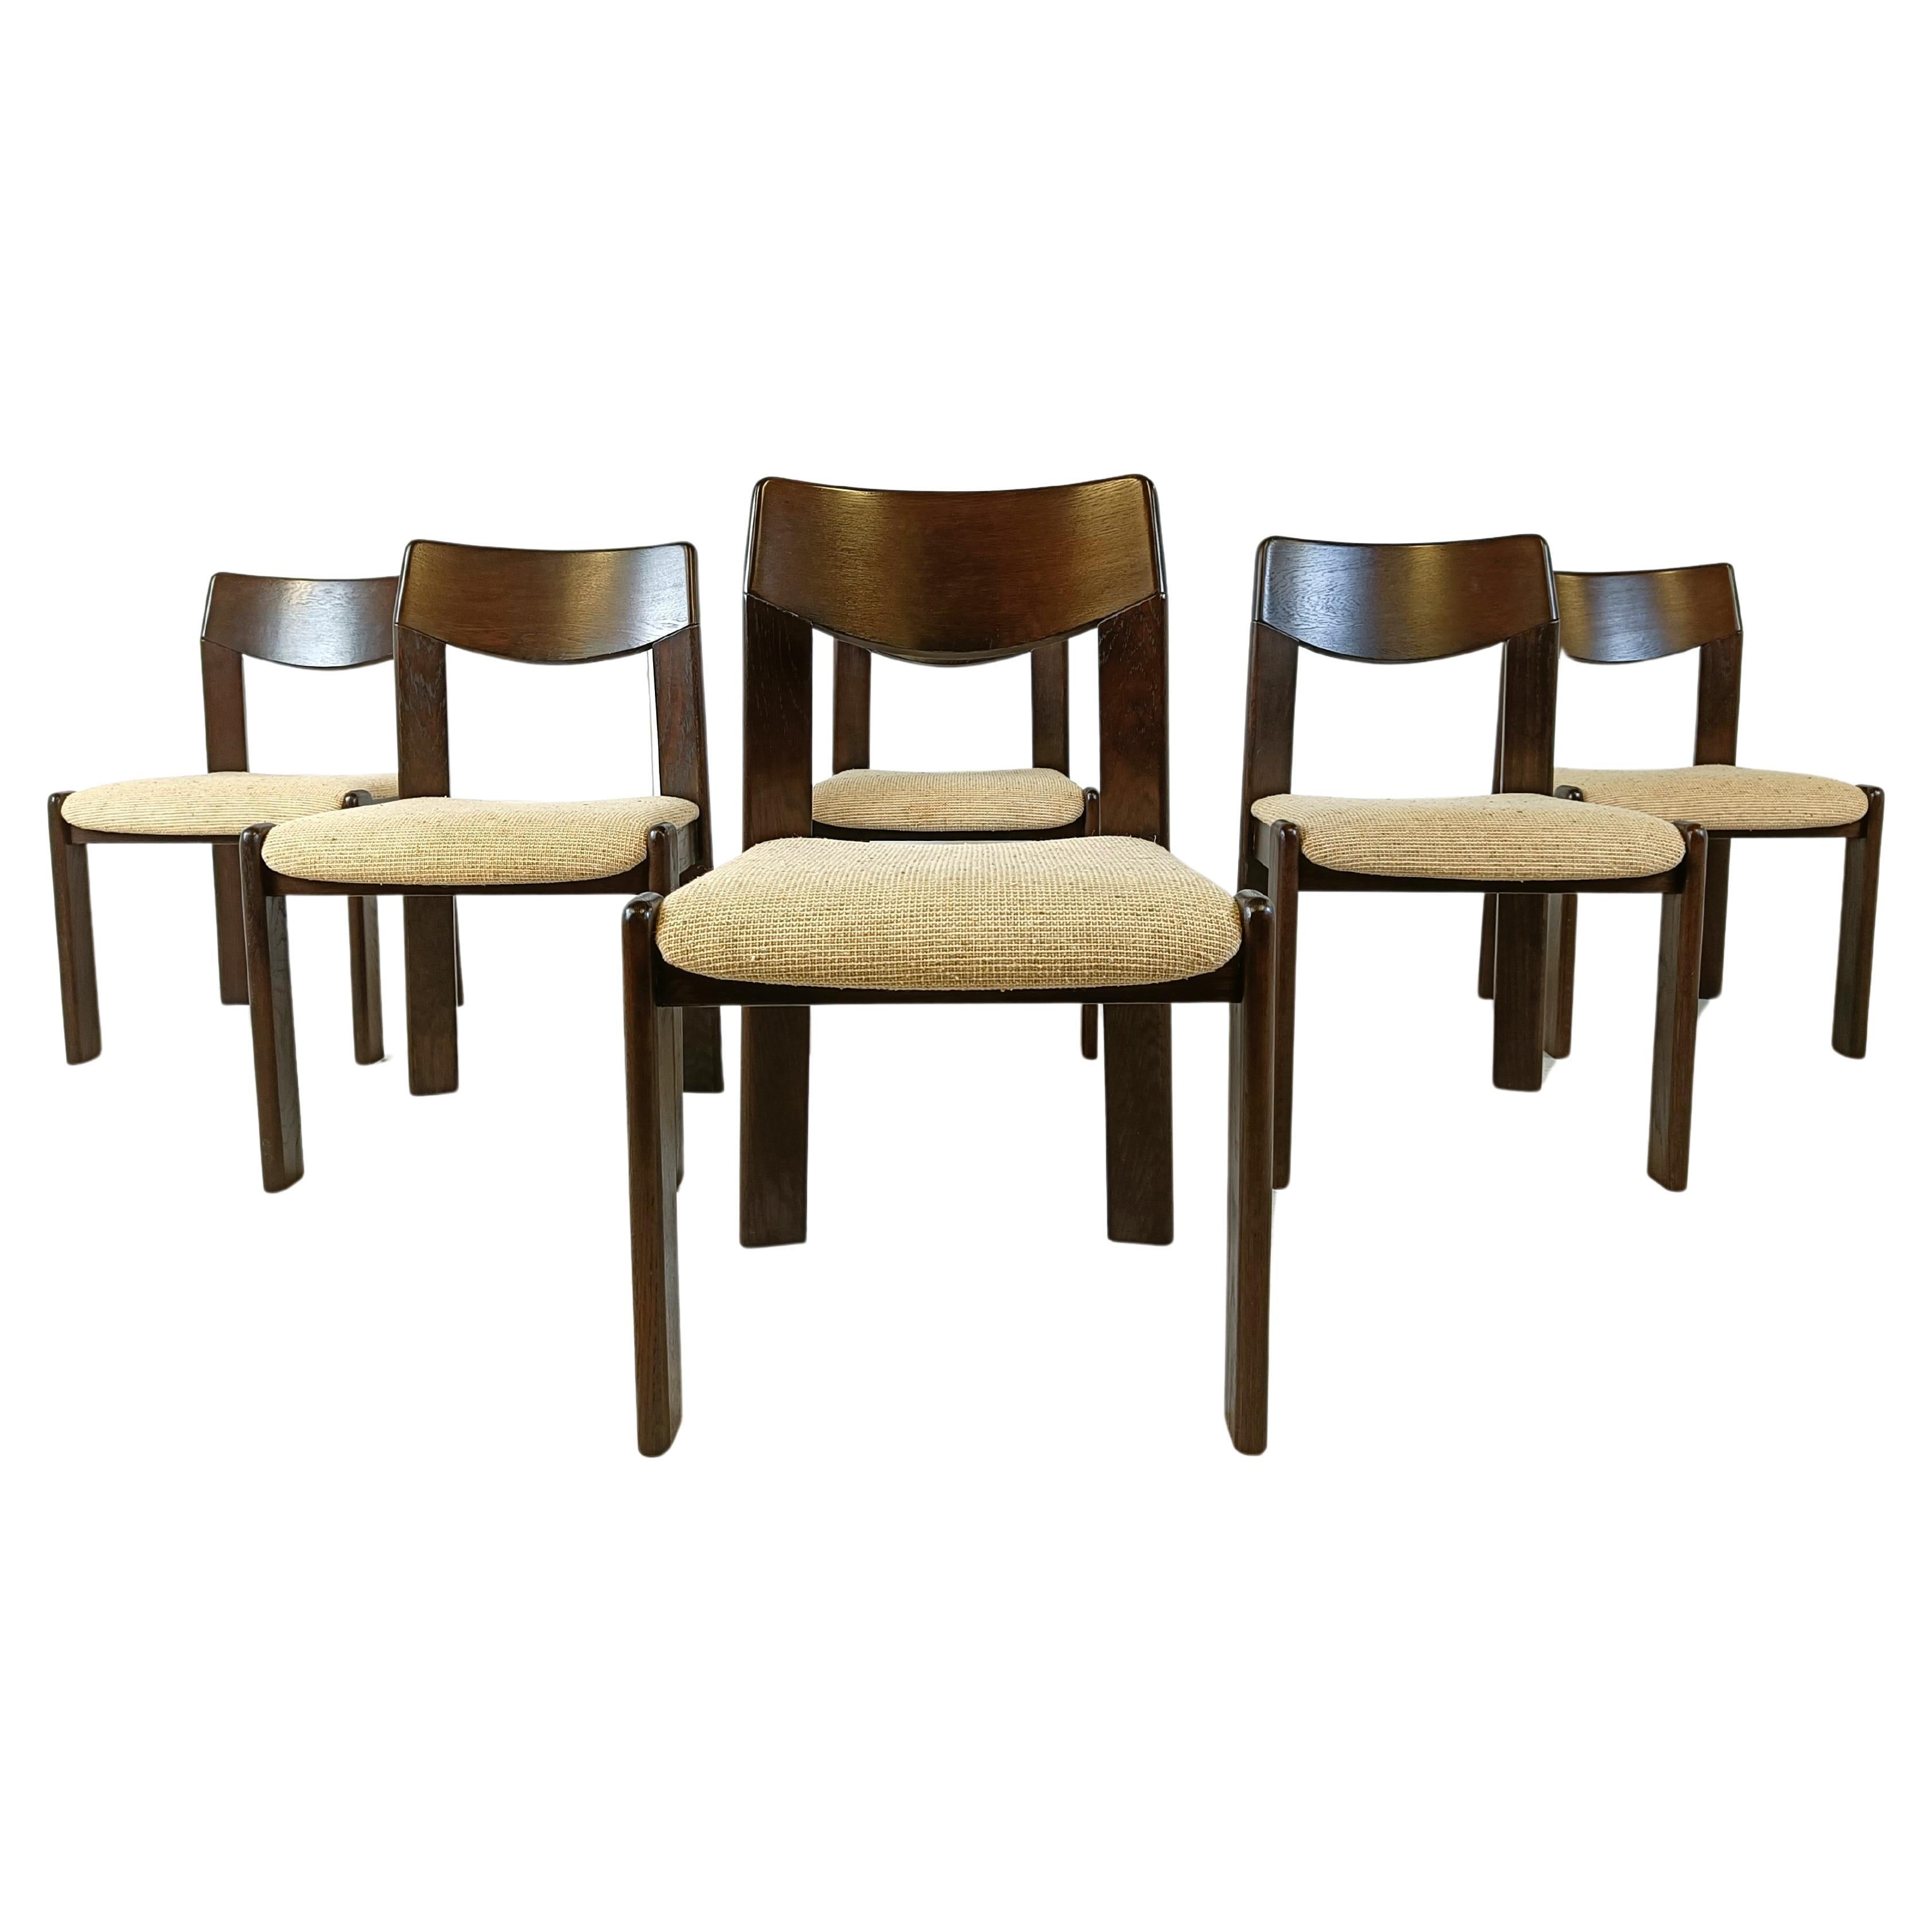 Vintage brutalist dining chairs, set of 6 - 1970s For Sale